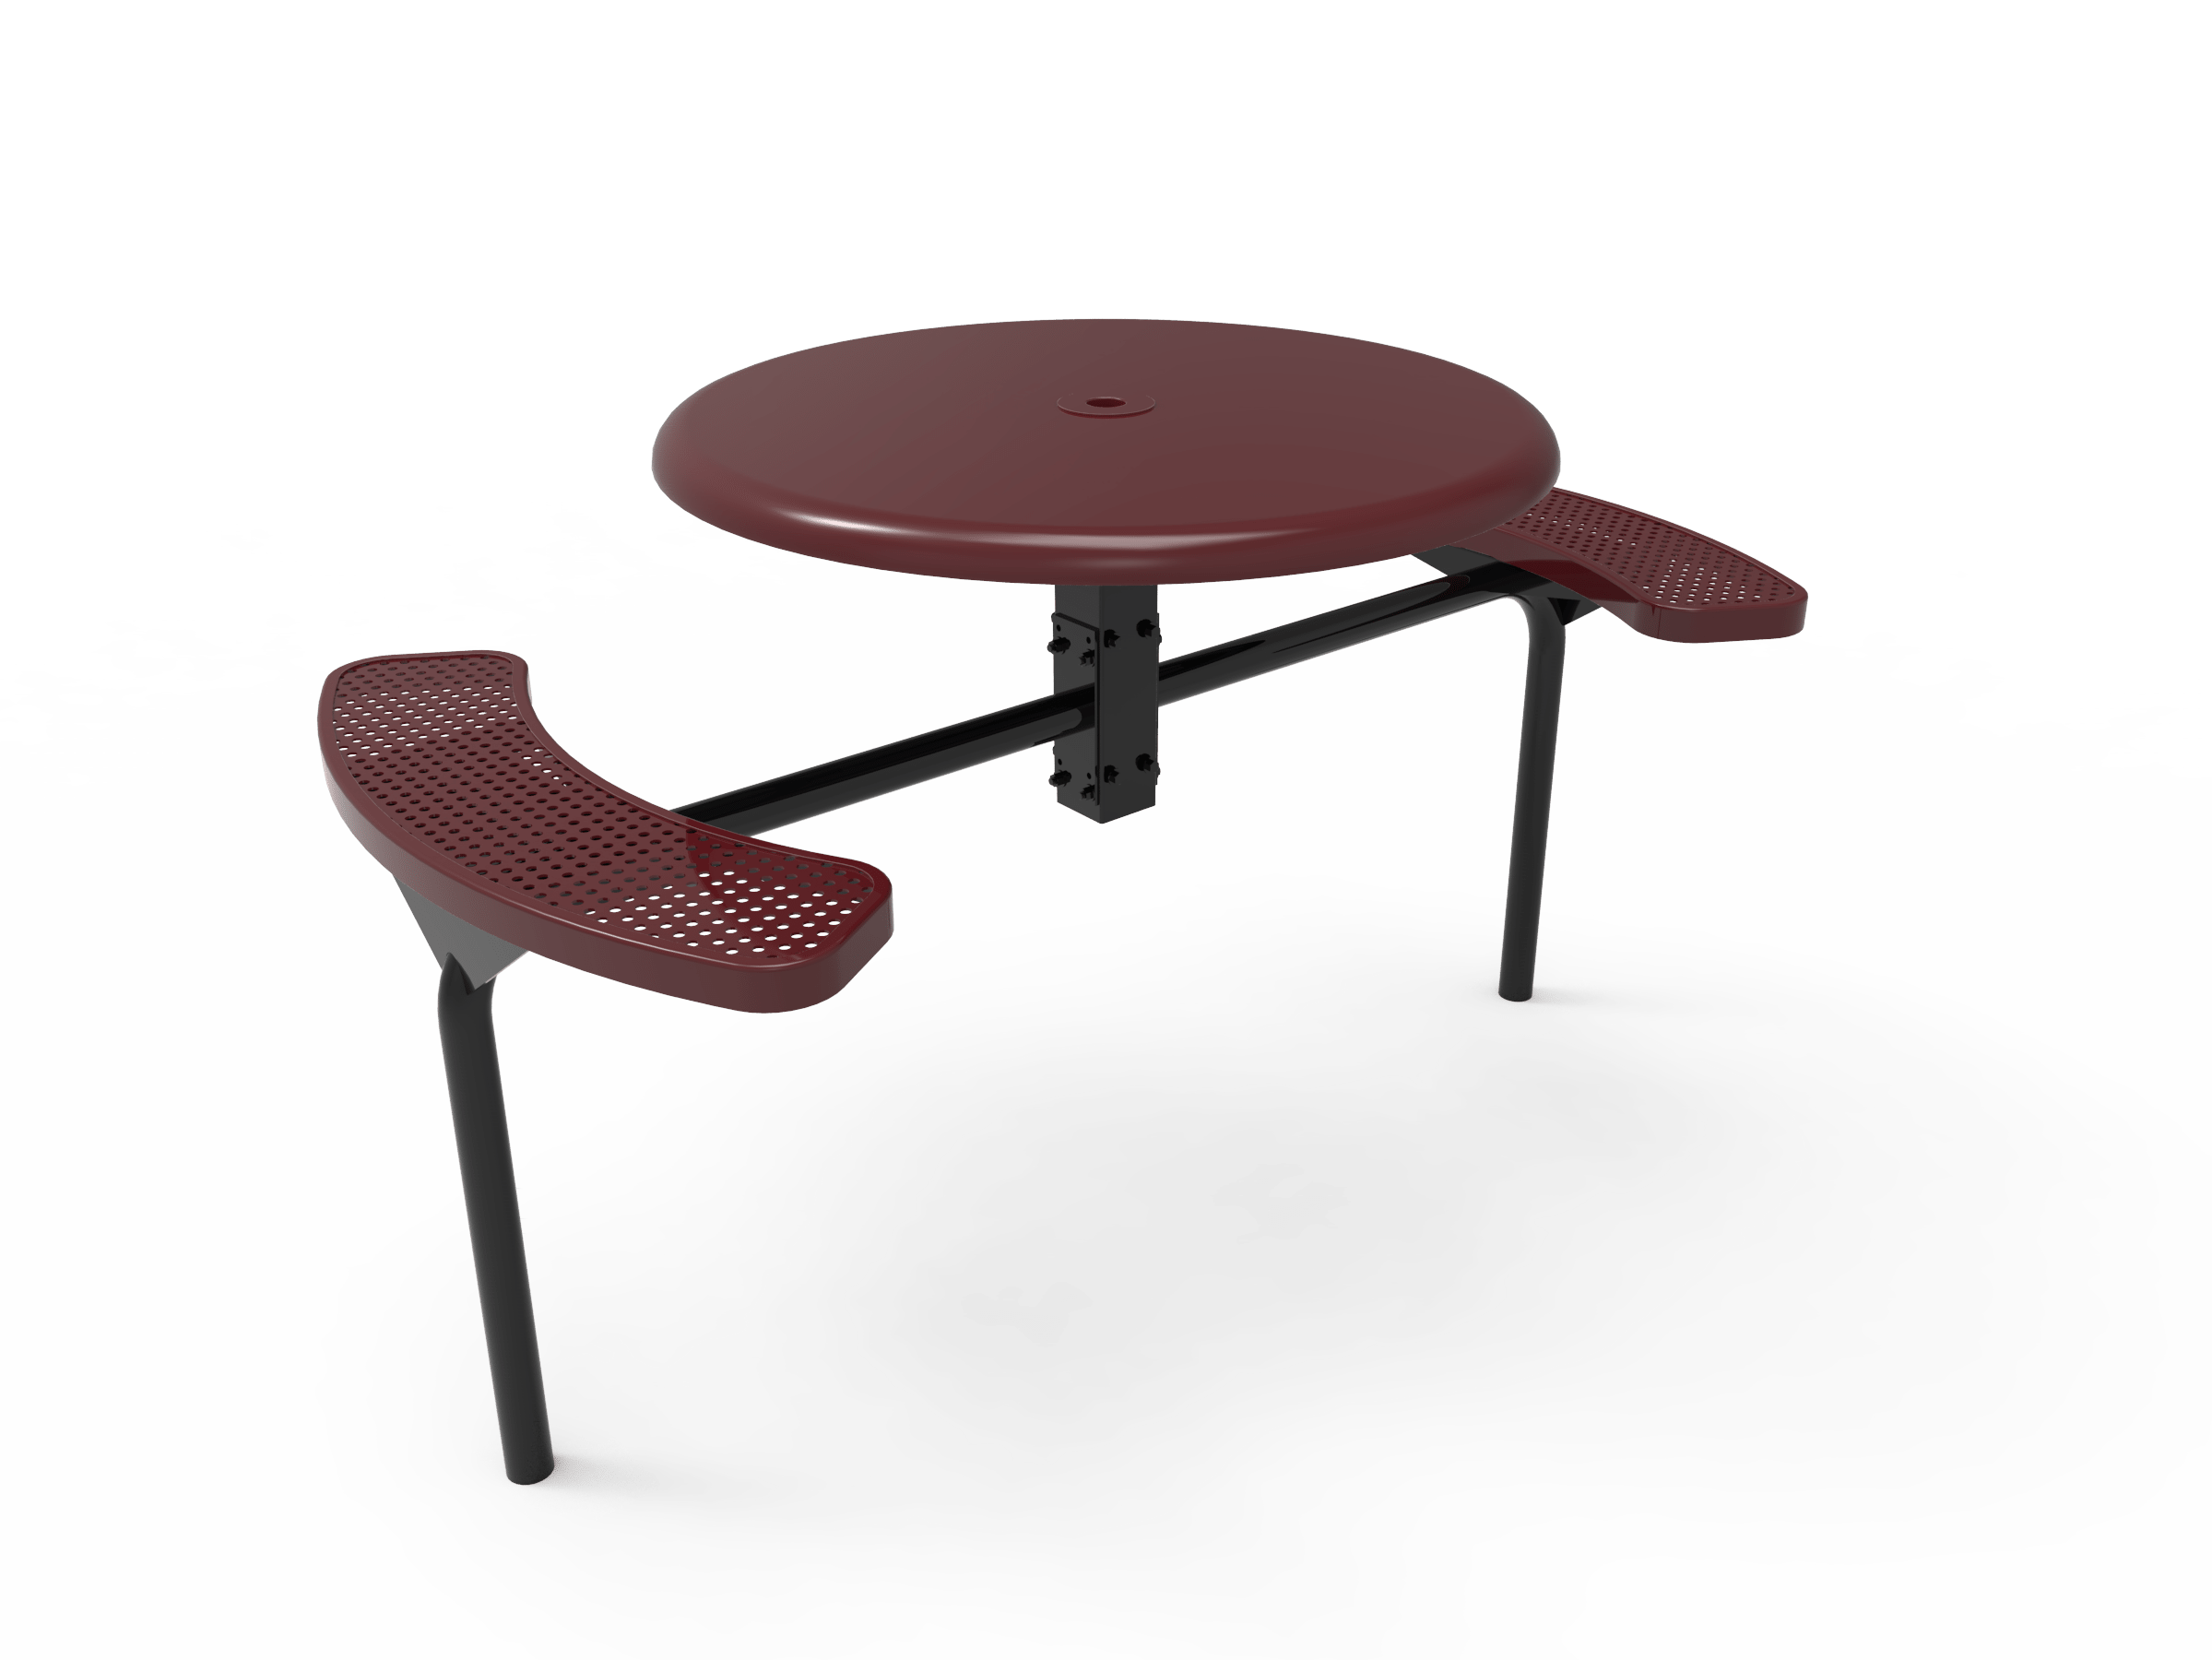 46″ Round Solid Top Nexus In Ground Table With 2 Seats-Punched
TRS46-D-51-012
Industry Standard Finish
$1929.00
TRS46-B-51-012
Advantage Premium Finish
$2429.00
